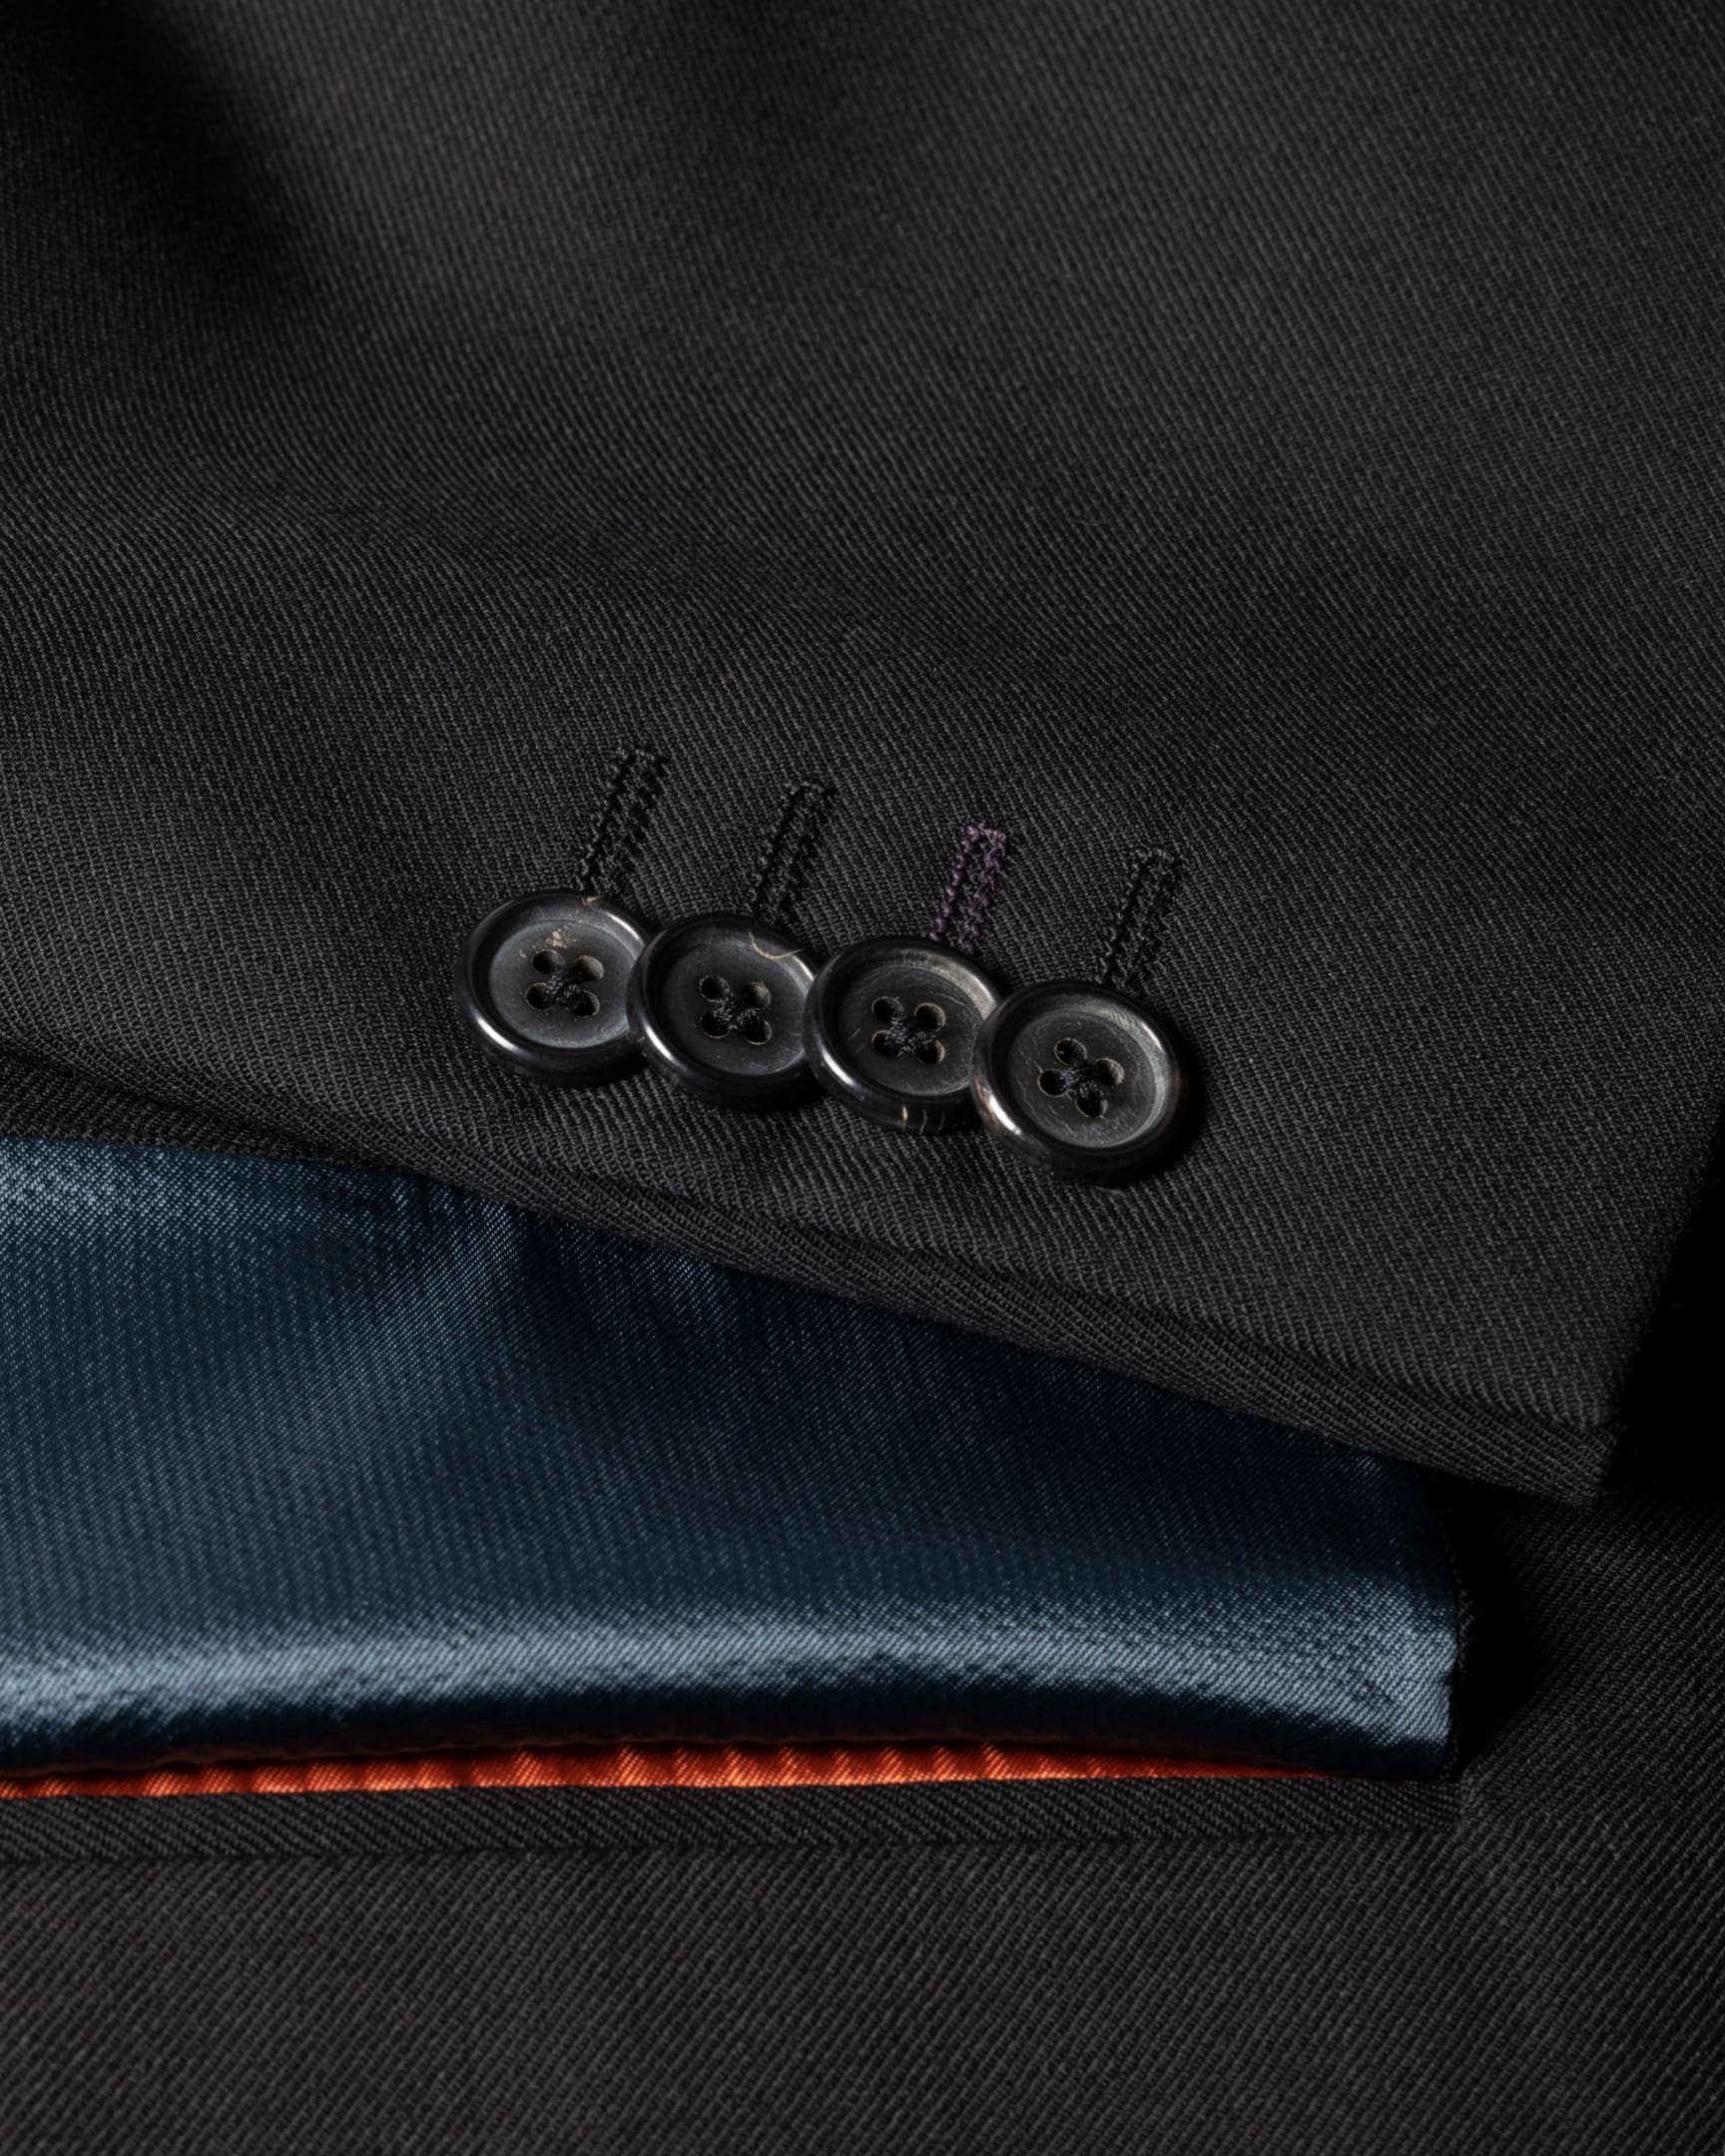 Detail View - The Soho - Tailored-Fit Black Wool 'A Suit To Travel In' Paul Smith